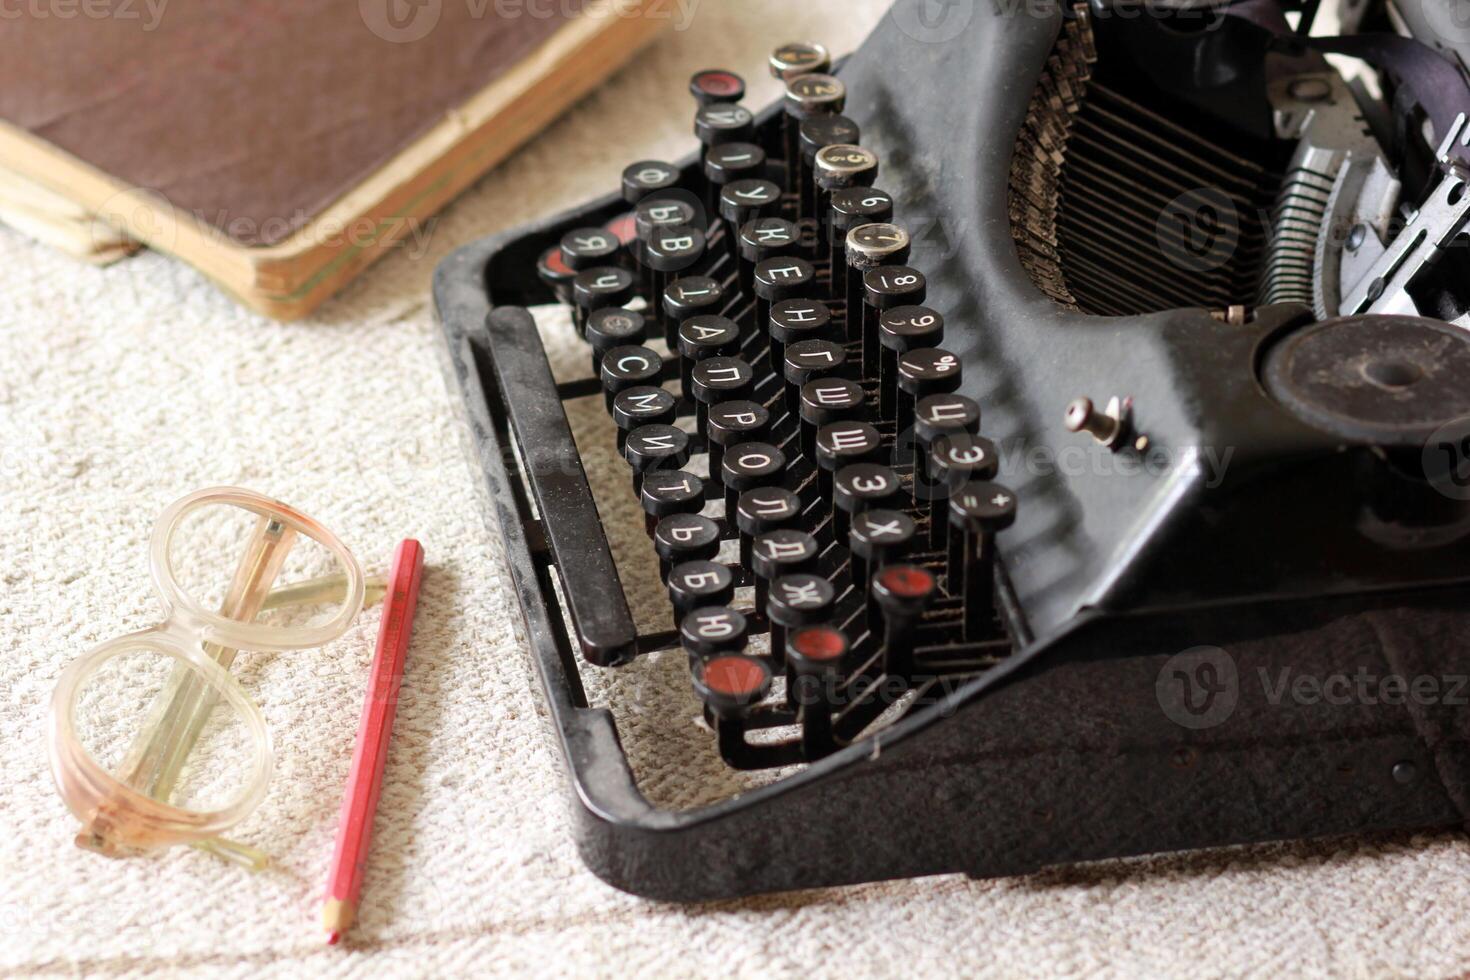 Black vintage metal type writer next to a pile of old note books, pair of eyeglasses and a red pencil on a linen tablecloth photo